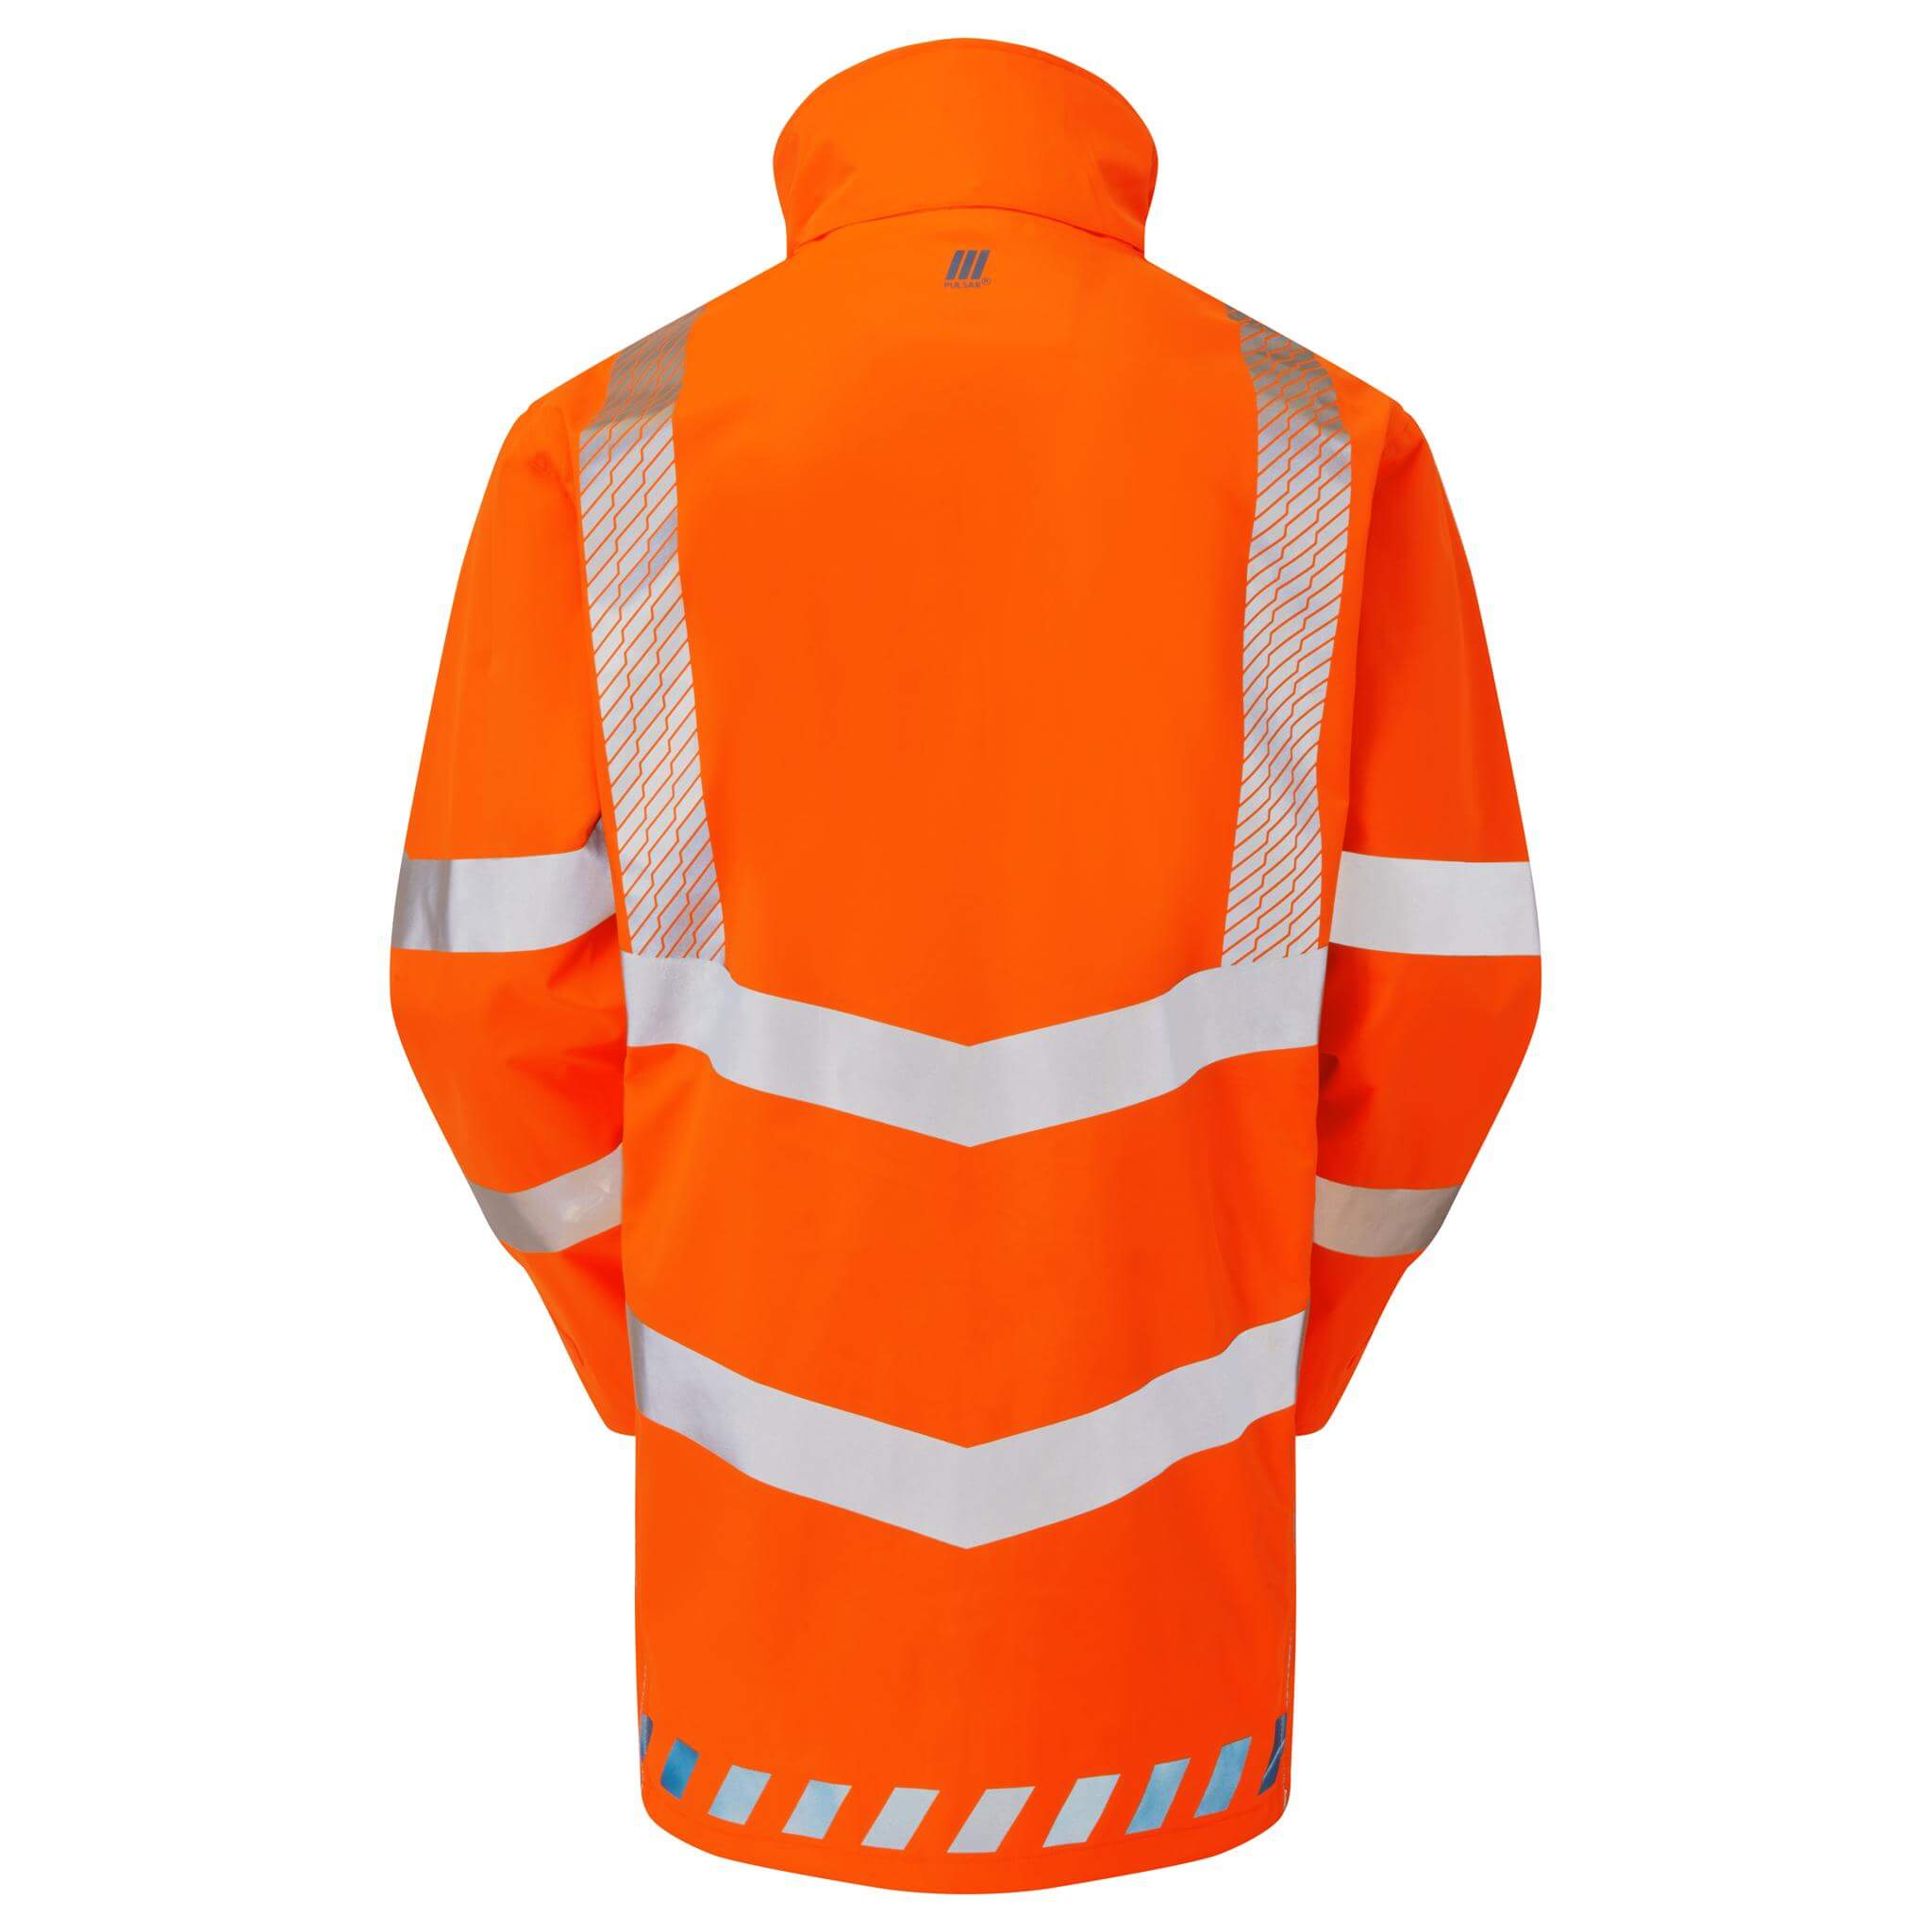 The evolution of high visibility protective workwear